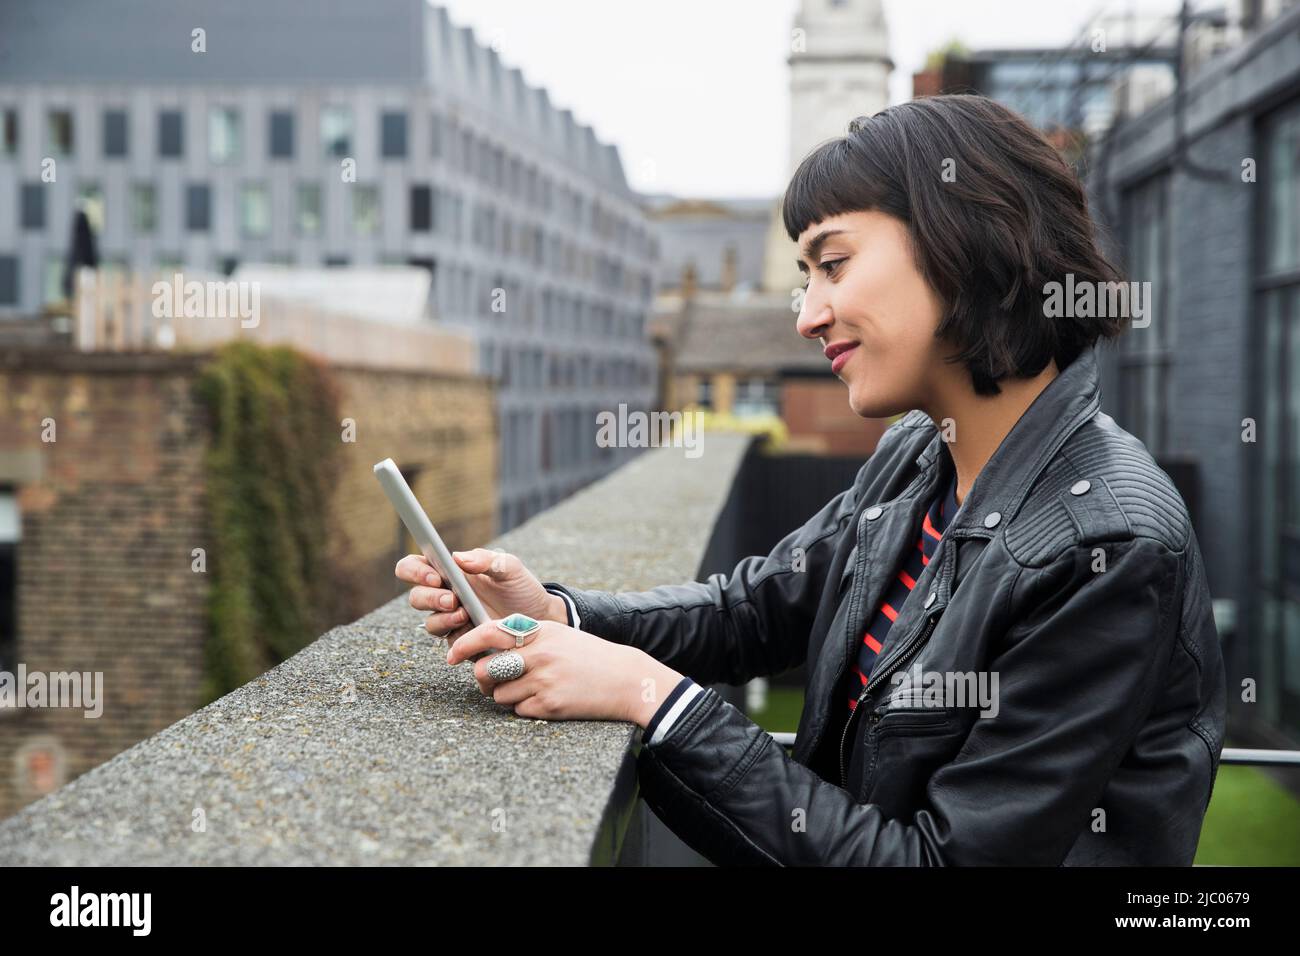 Woman on mobile phone standing at edge of building on rooftop patio Stock Photo